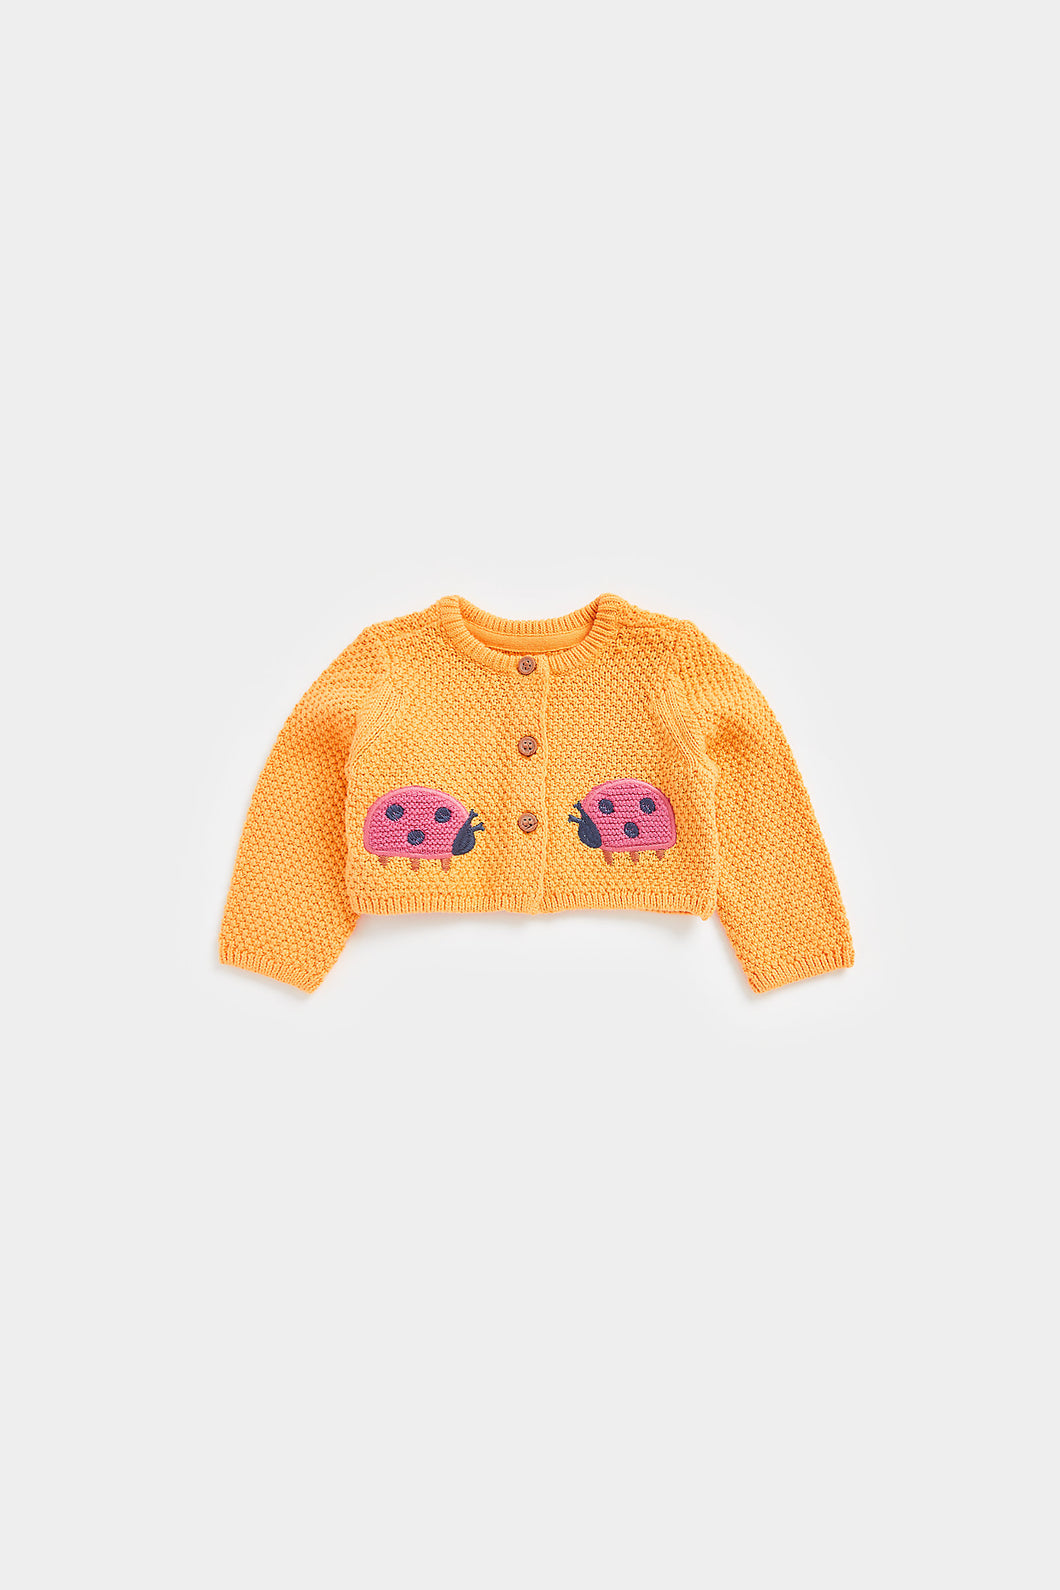 Mothercare Ladybird Knitted Cardigan